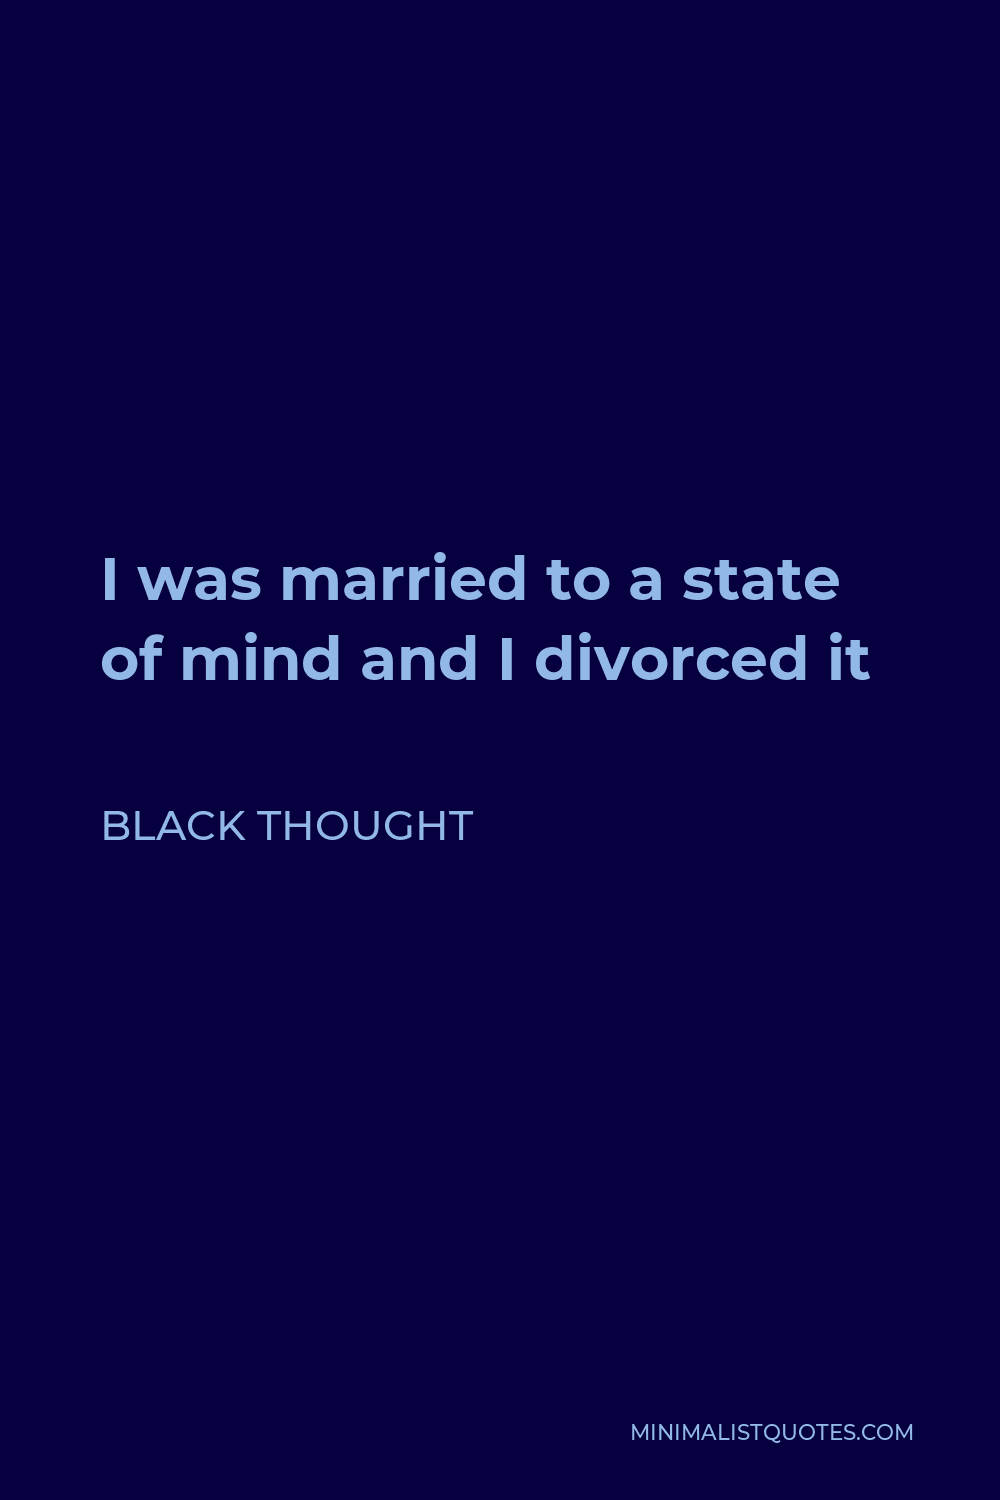 Black Thought Quote - I was married to a state of mind and I divorced it